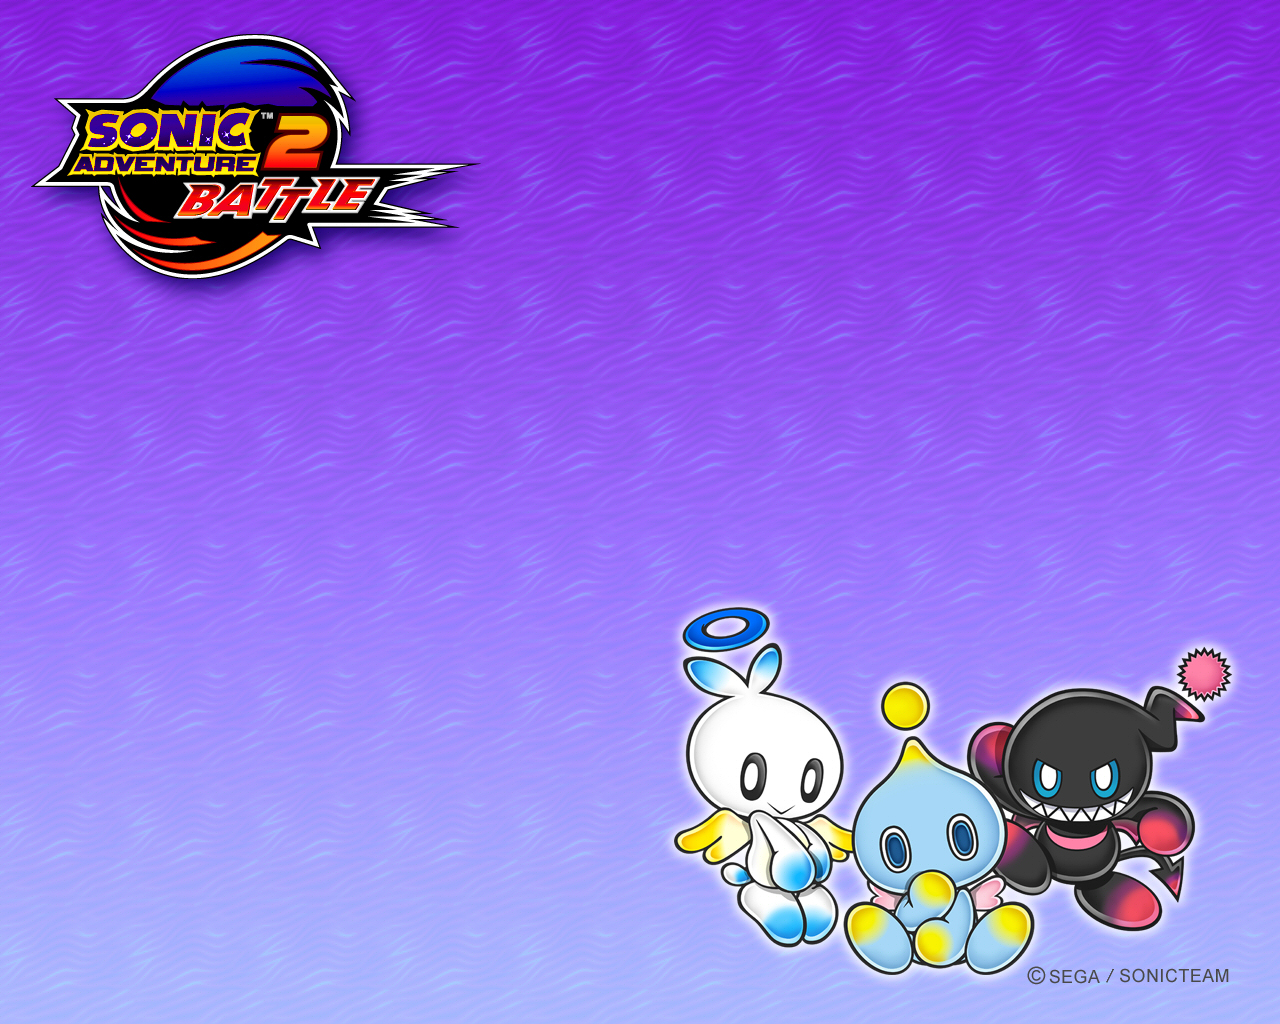 Download official Chao wallpaper!